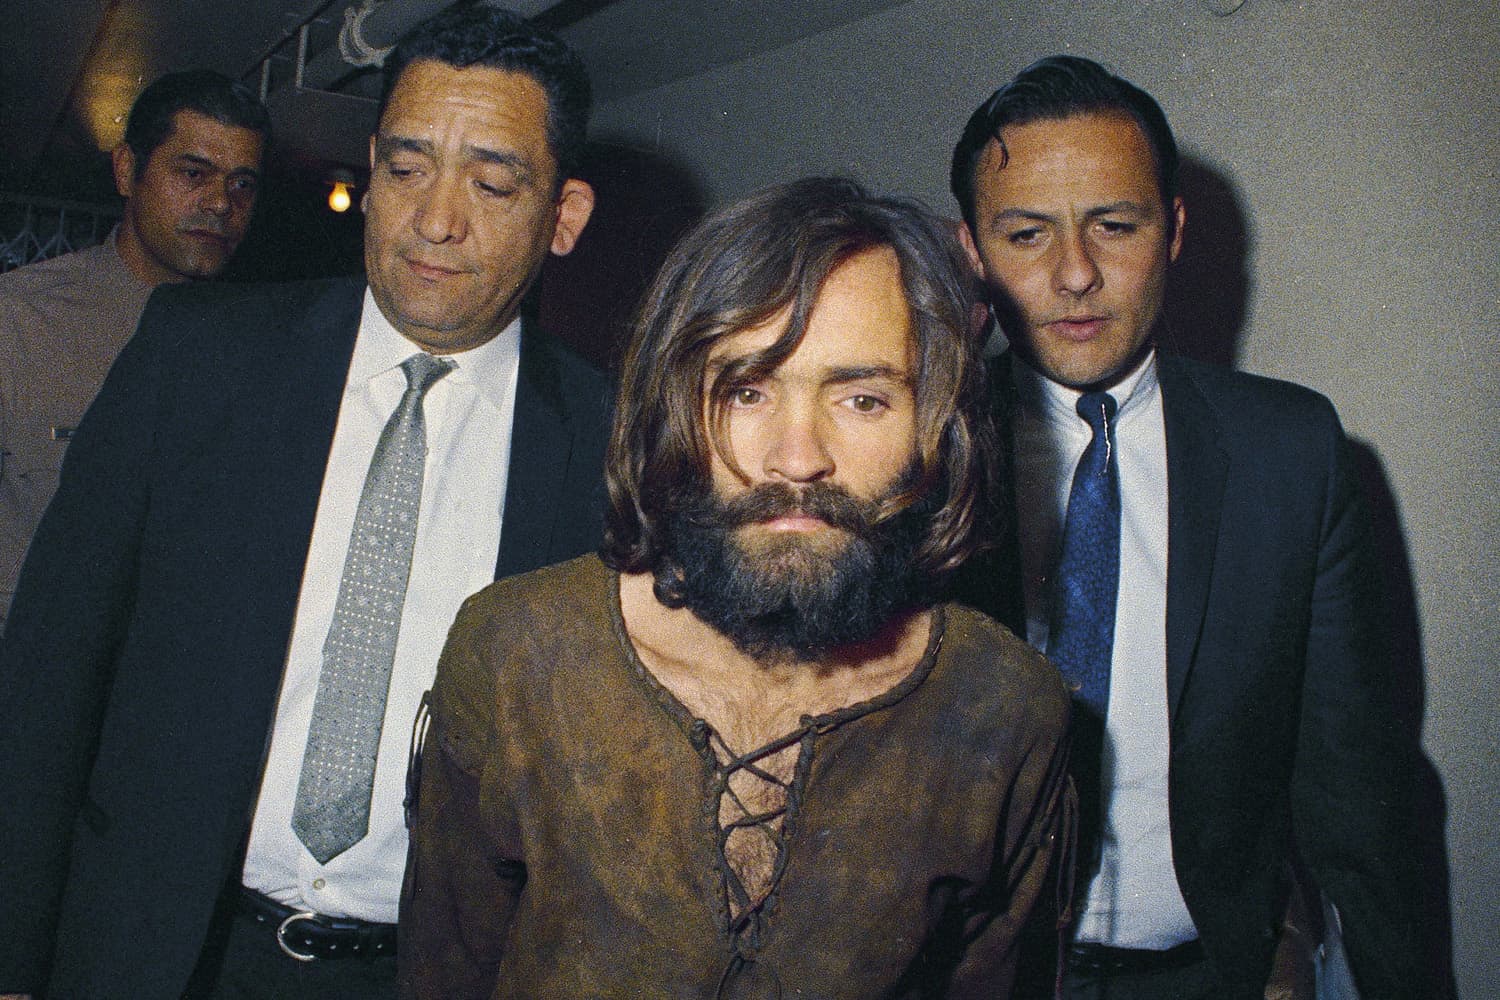 Charles Manson in a 1969 file photograph. (AP Photo, File)